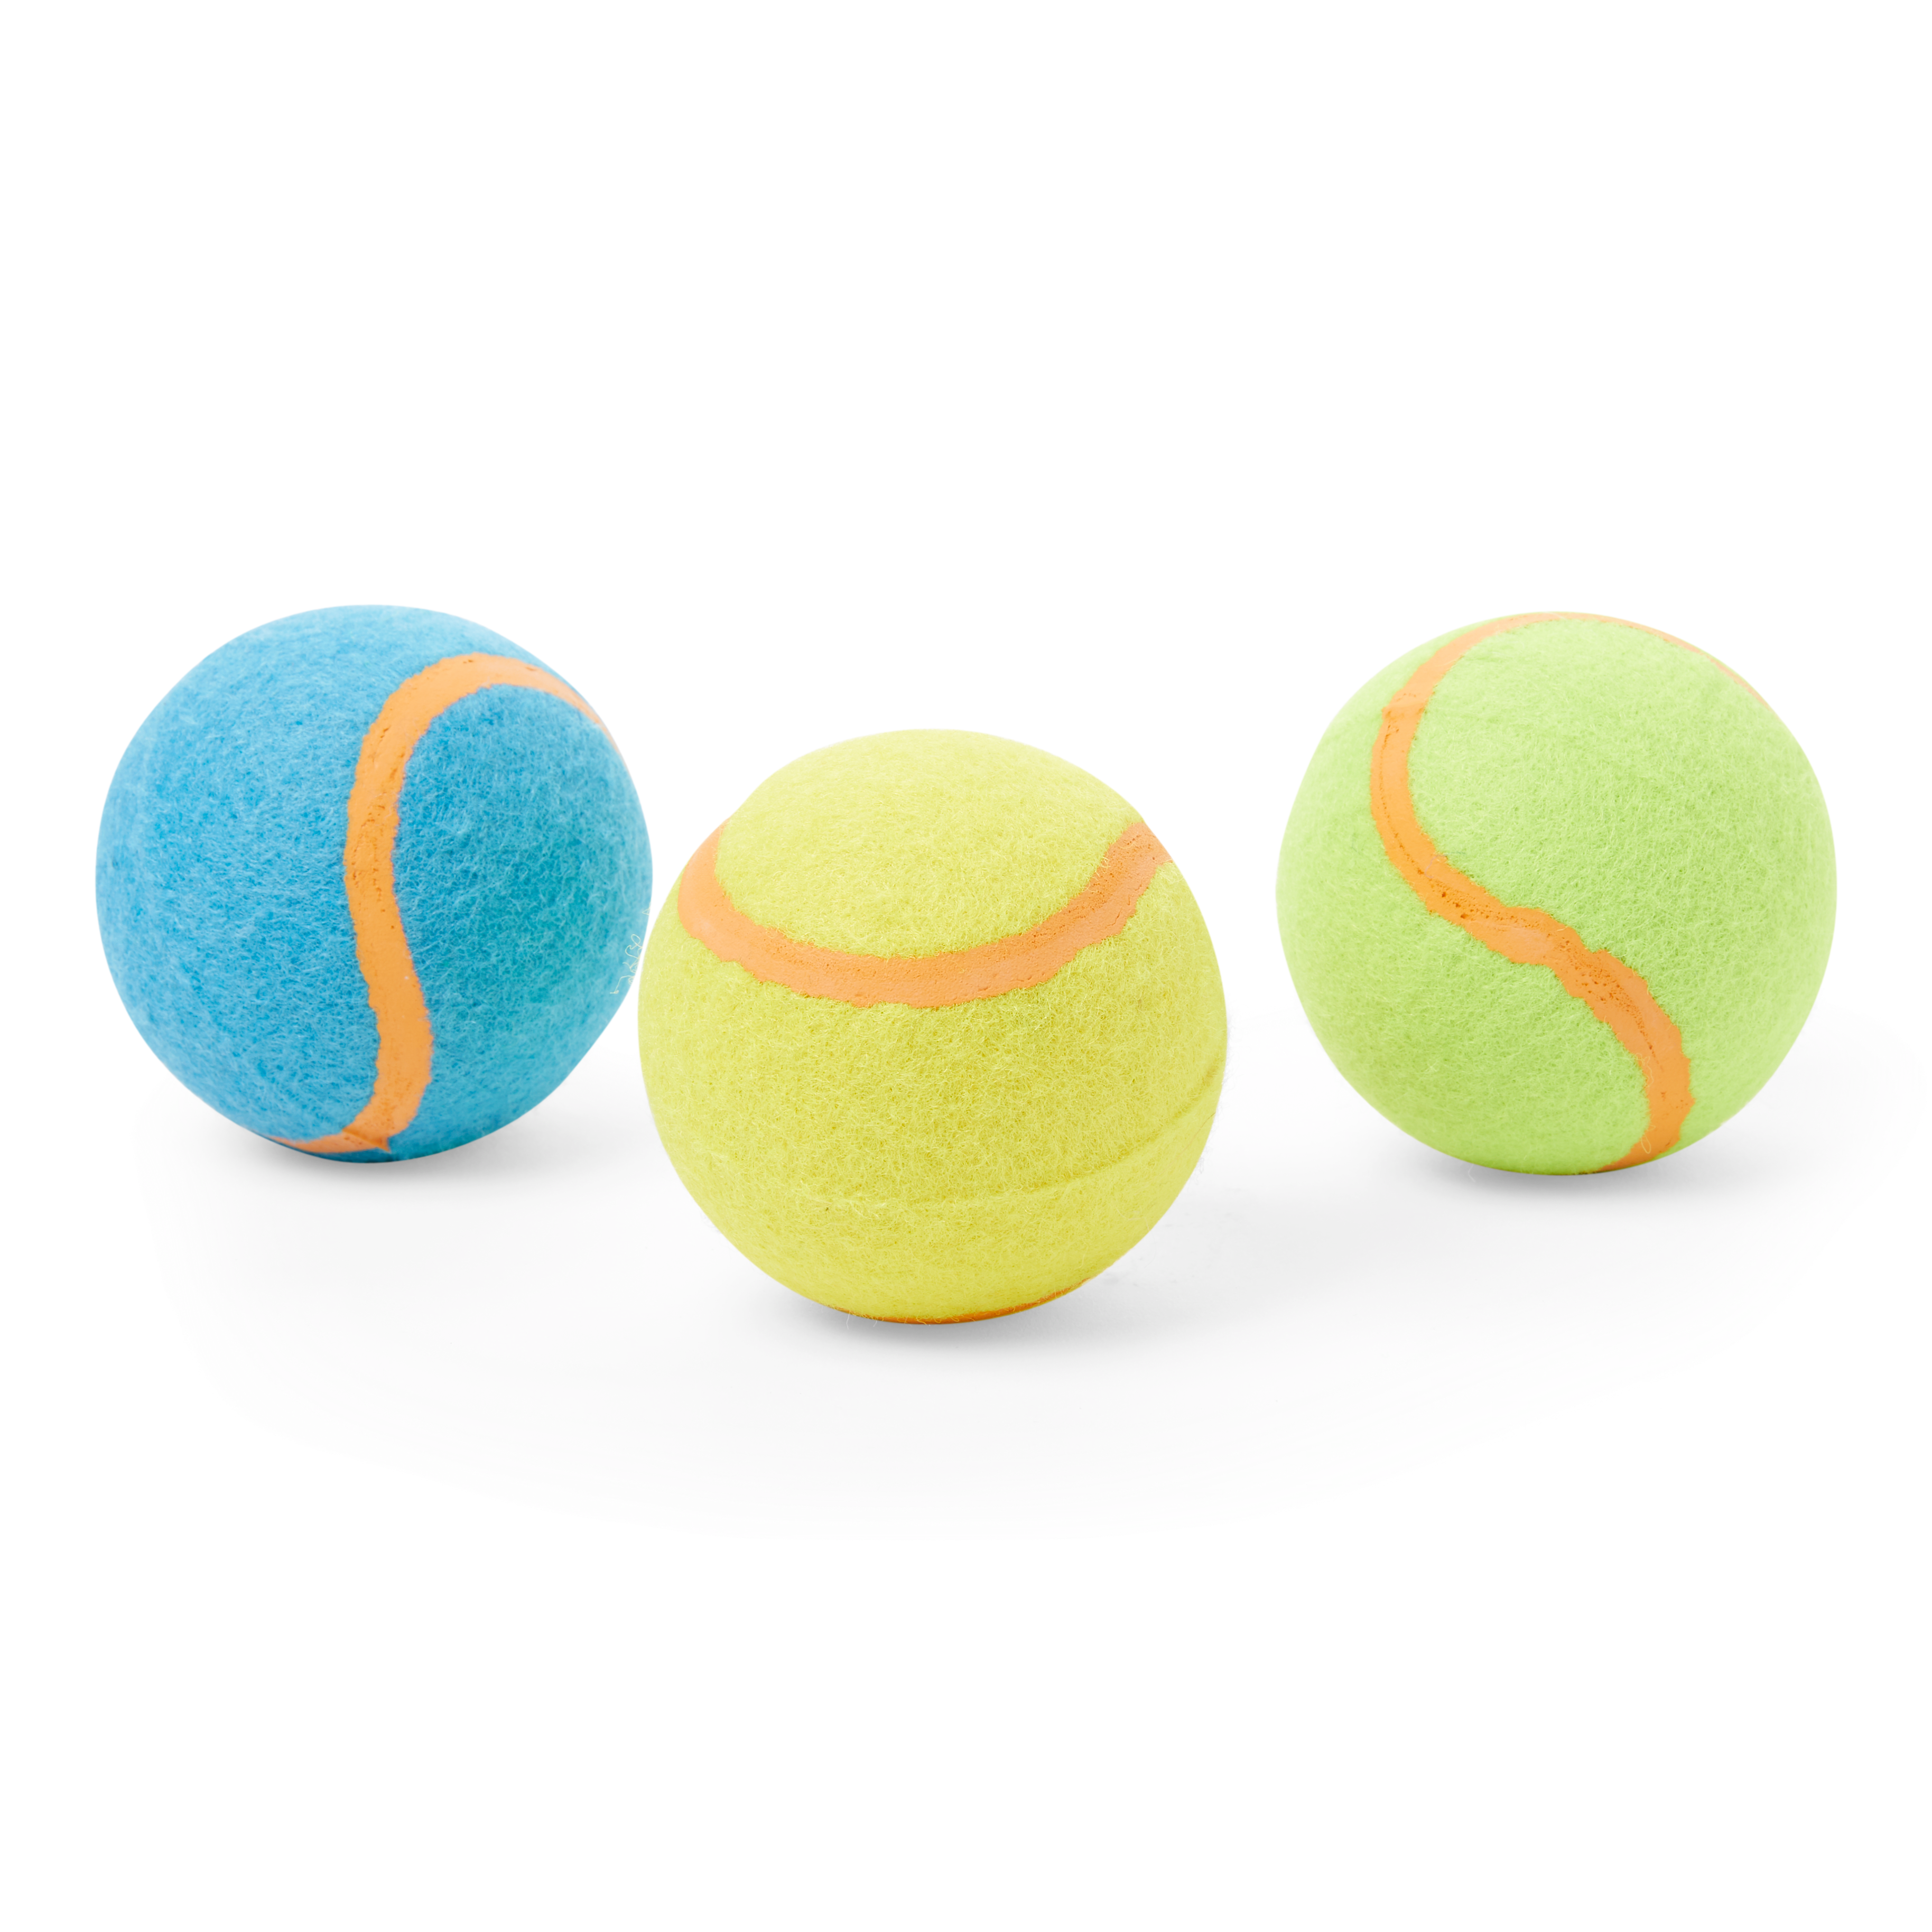 2 x Blue Launch It Set Dog Fetch Tennis Ball Outdoor Activity Play Long Distance Launcher Exercise